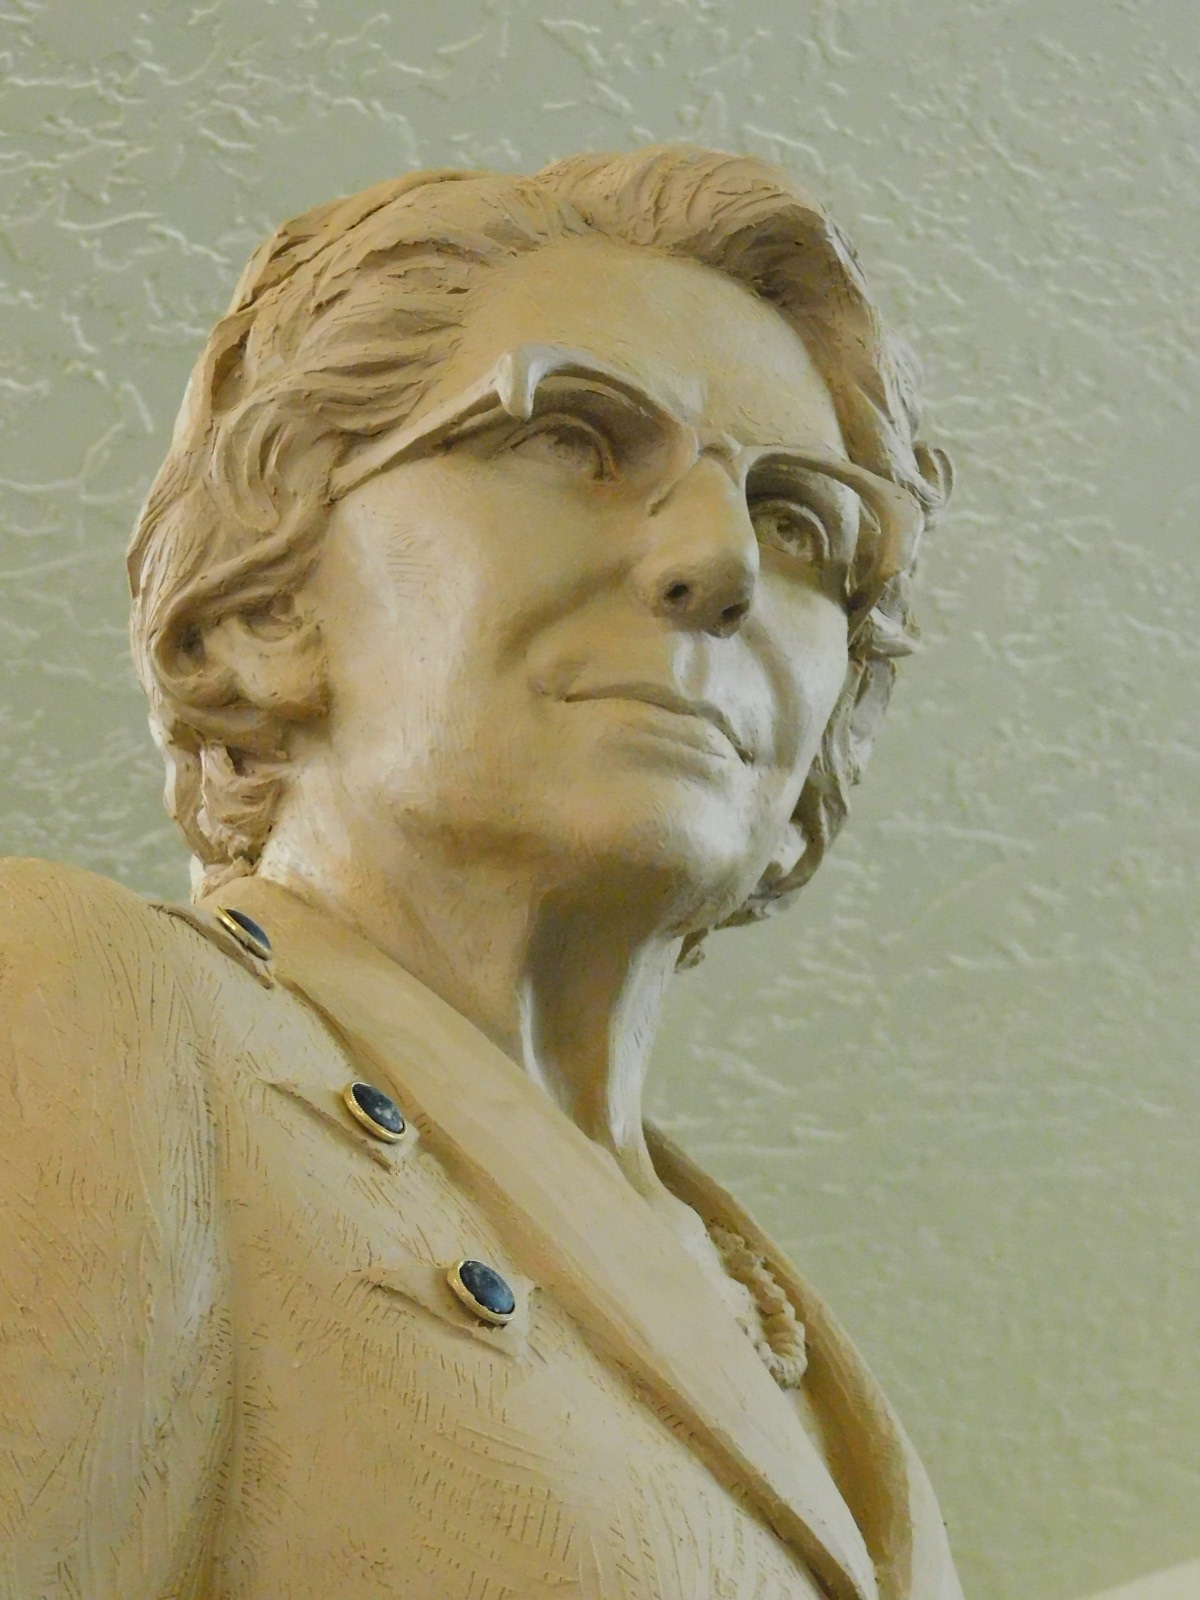 The face on the clay model of the Juanita Brooks statue